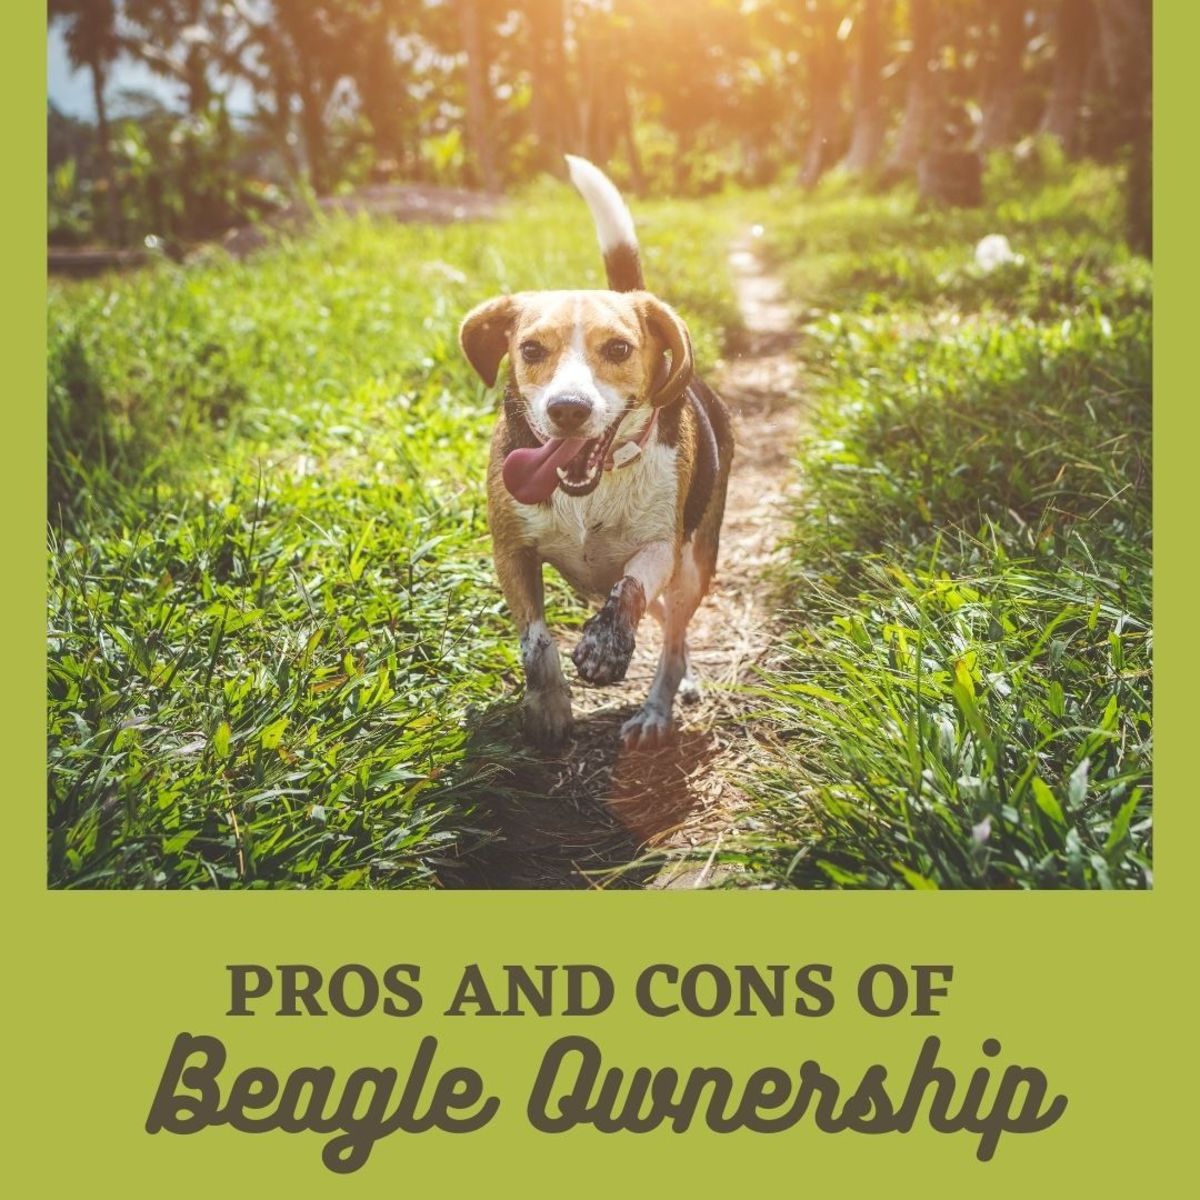 Pros and Cons of Owning Beagles - PetHelpful